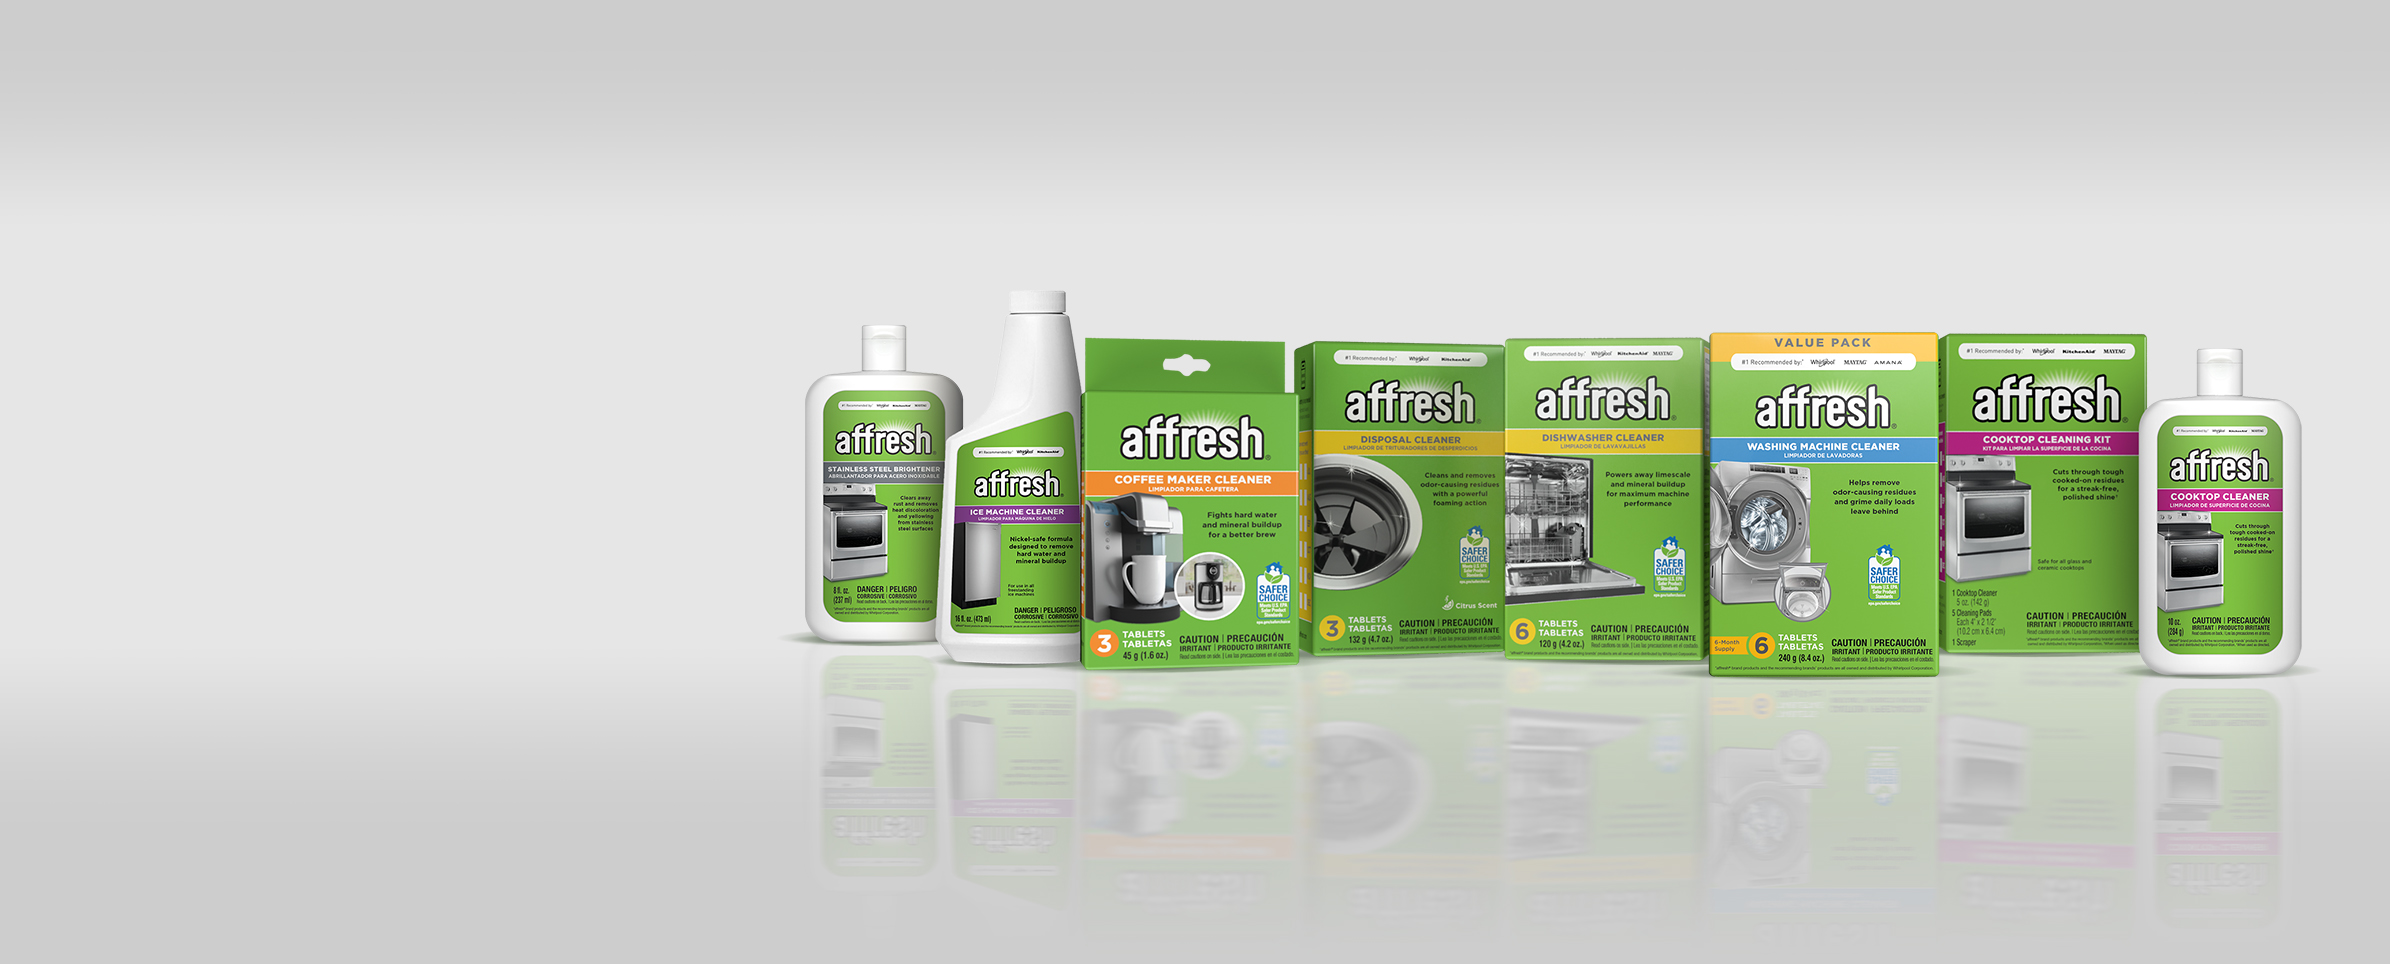 Affresh appliance cleaners.